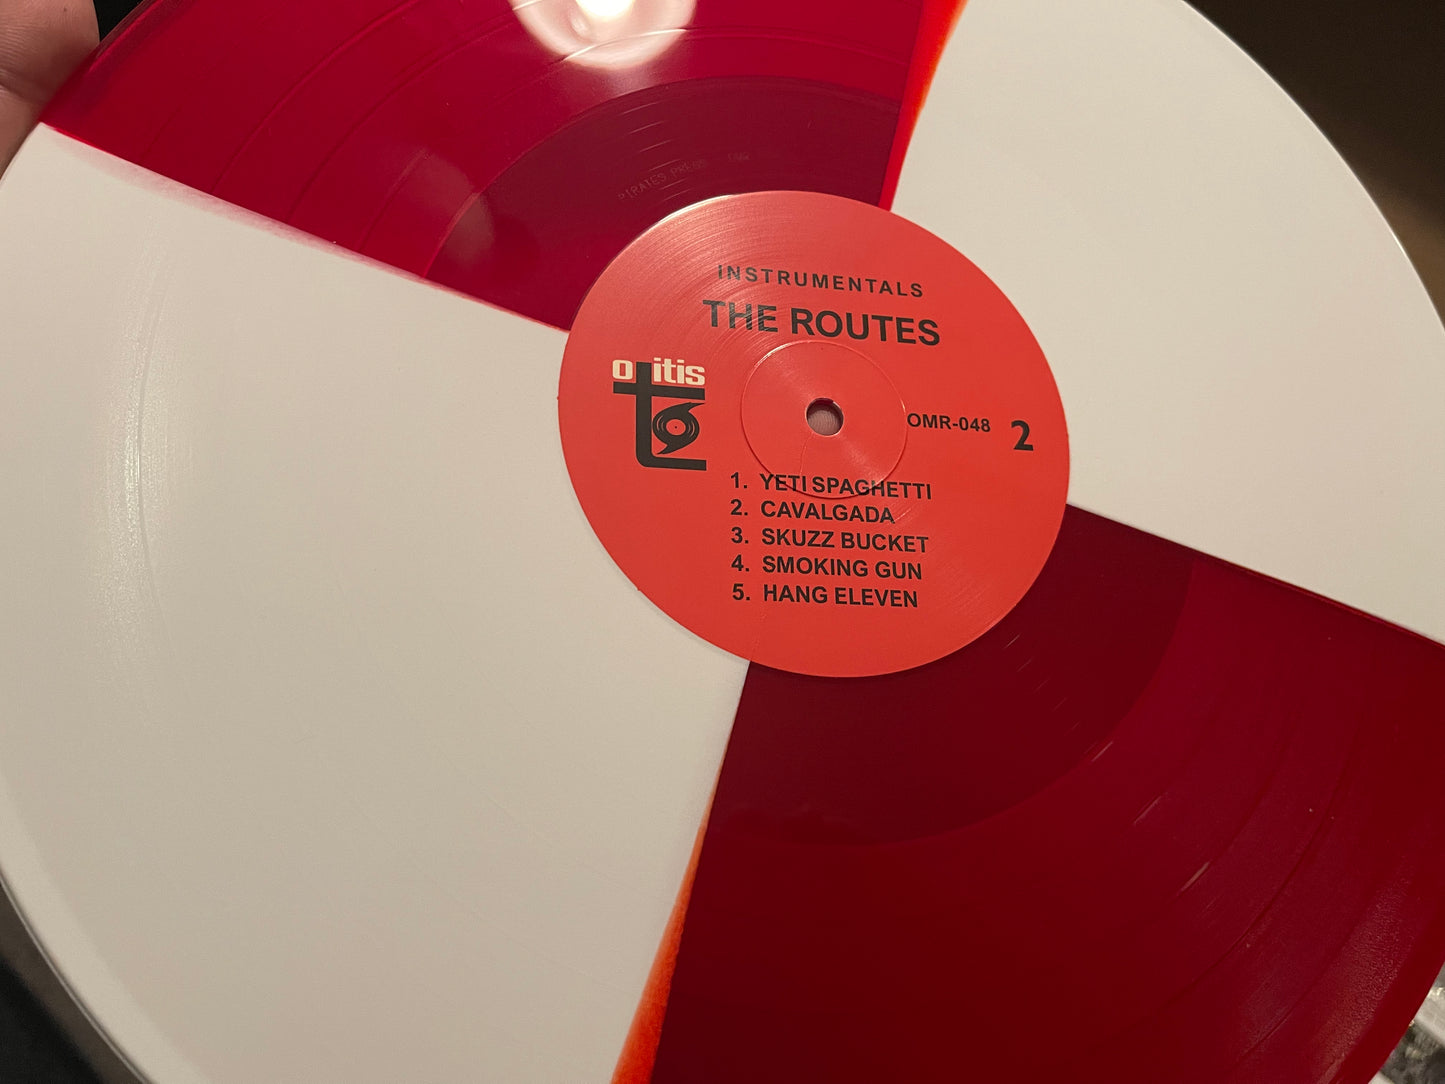 OMR-048 The Routes “Instrumentals” LP (American Pressing on 2 Different Color Variants)